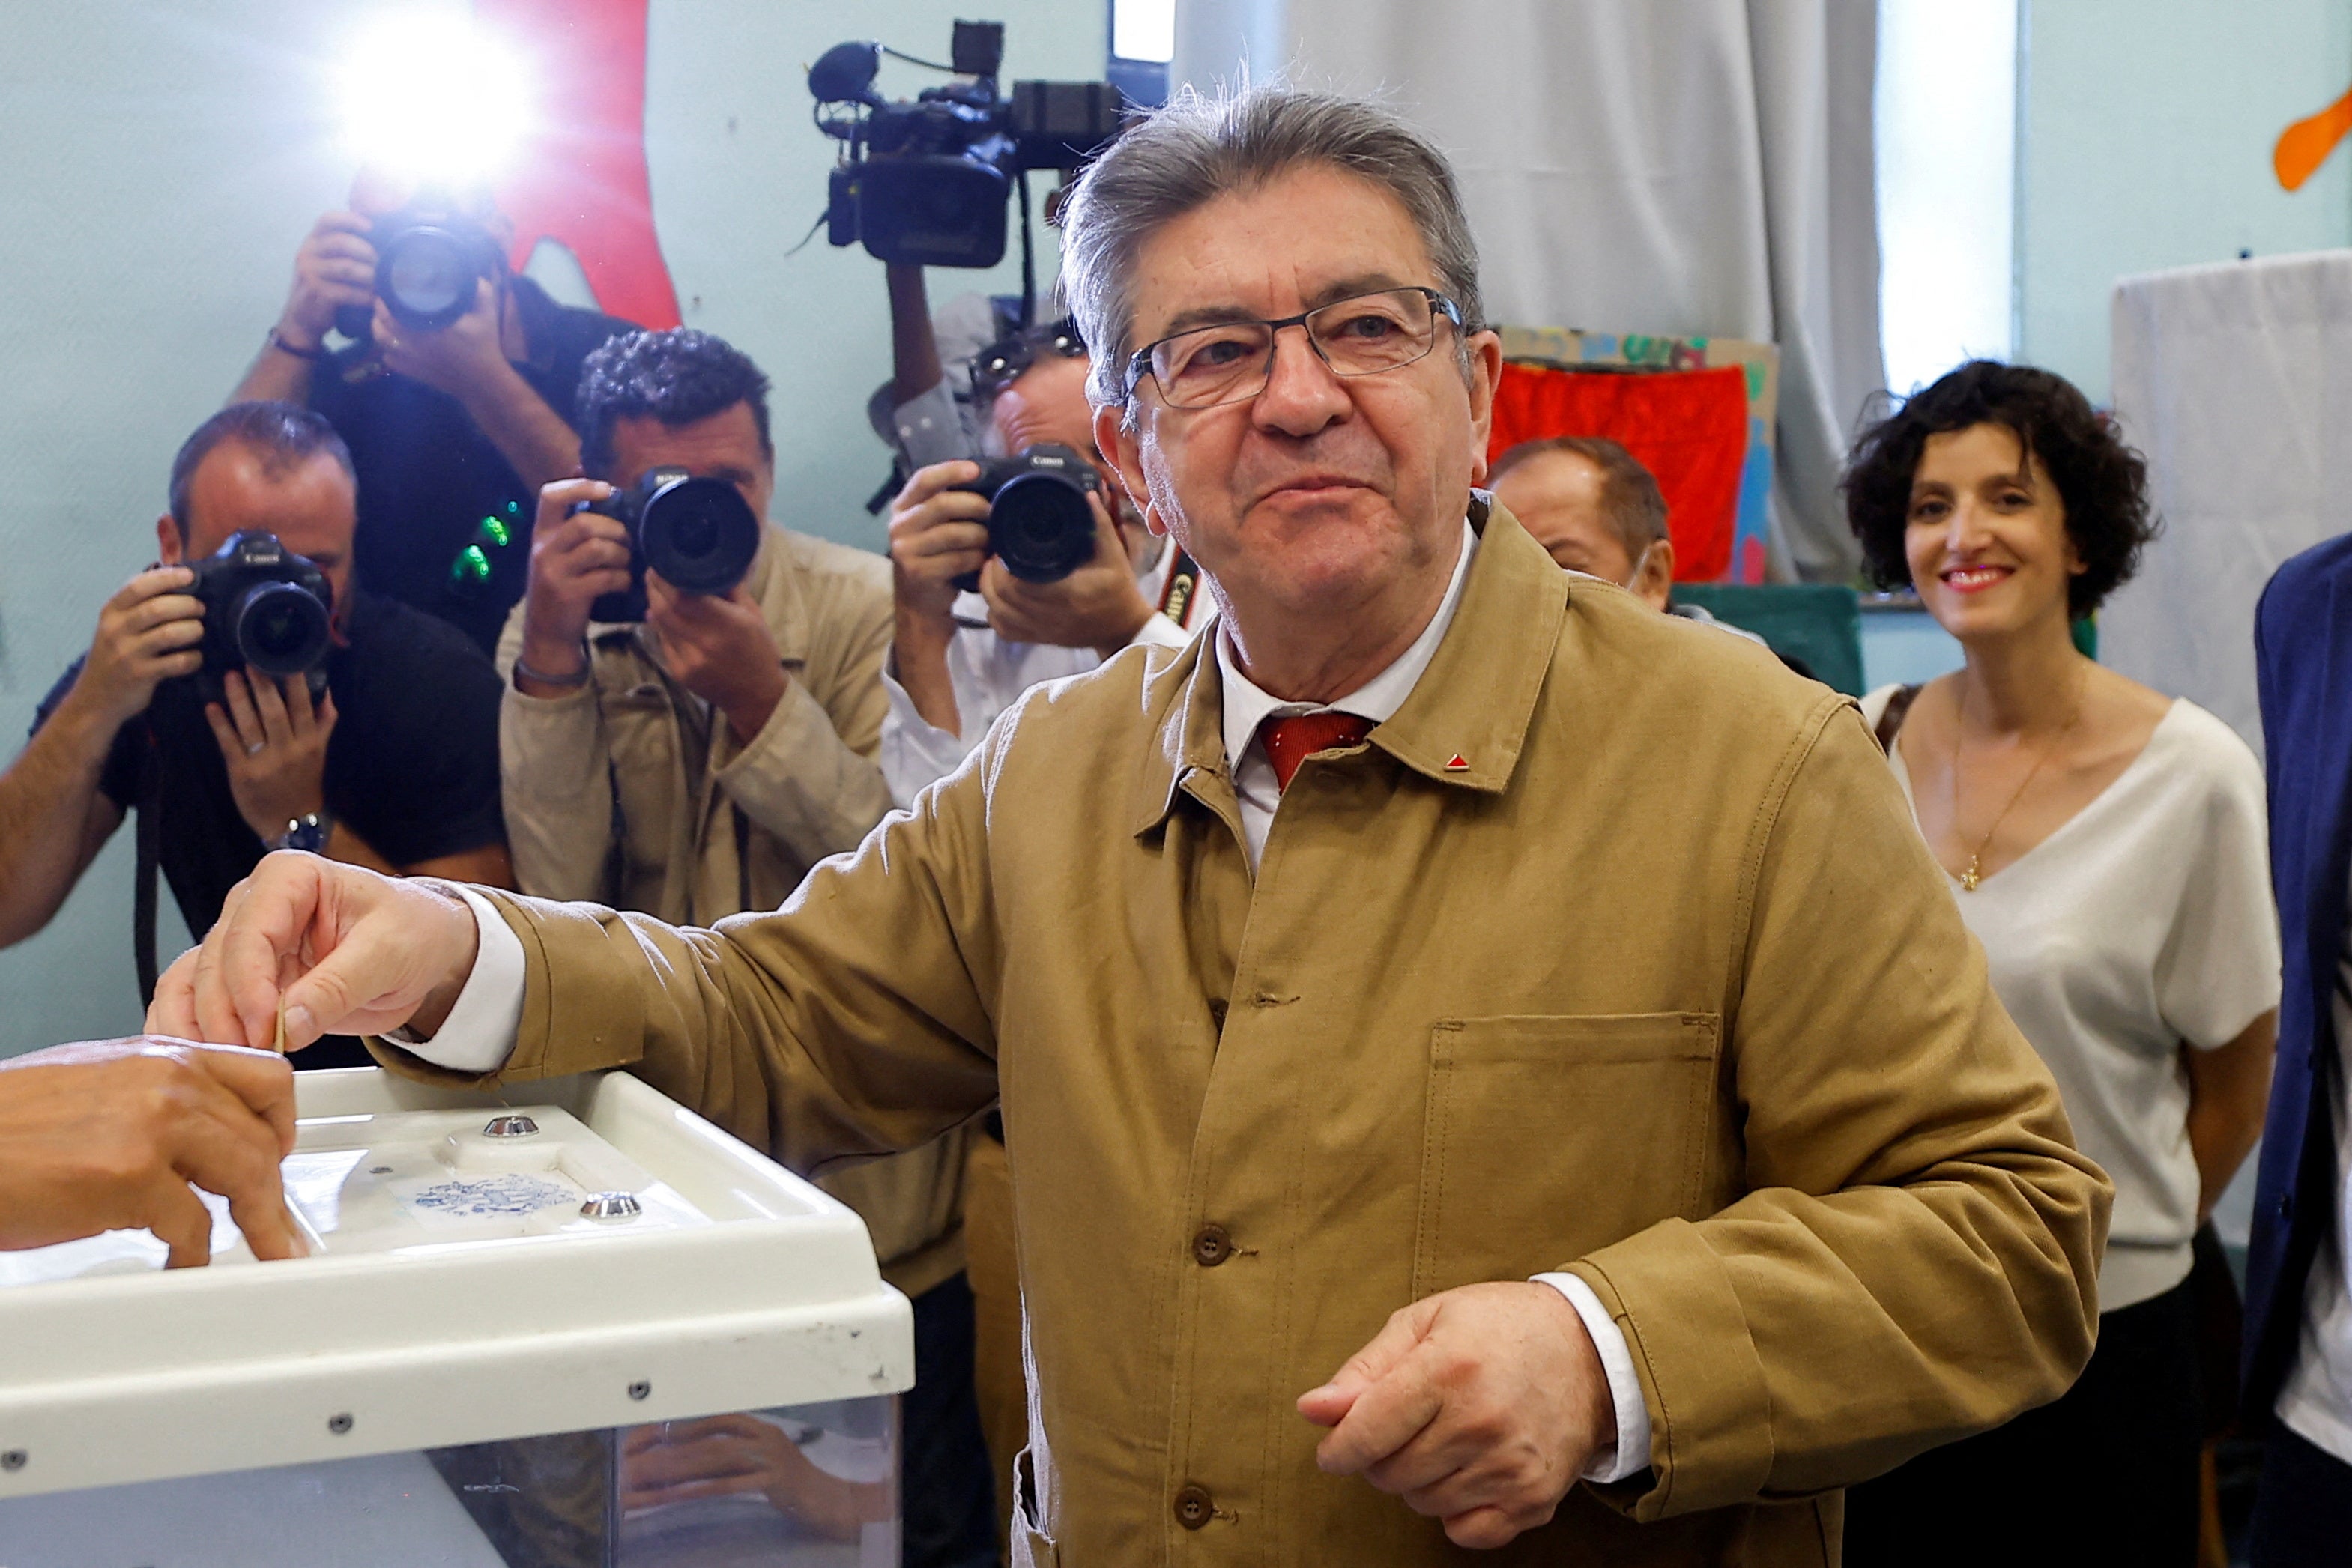 Jean-Luc Melenchon, leader of the French far-left opposition party